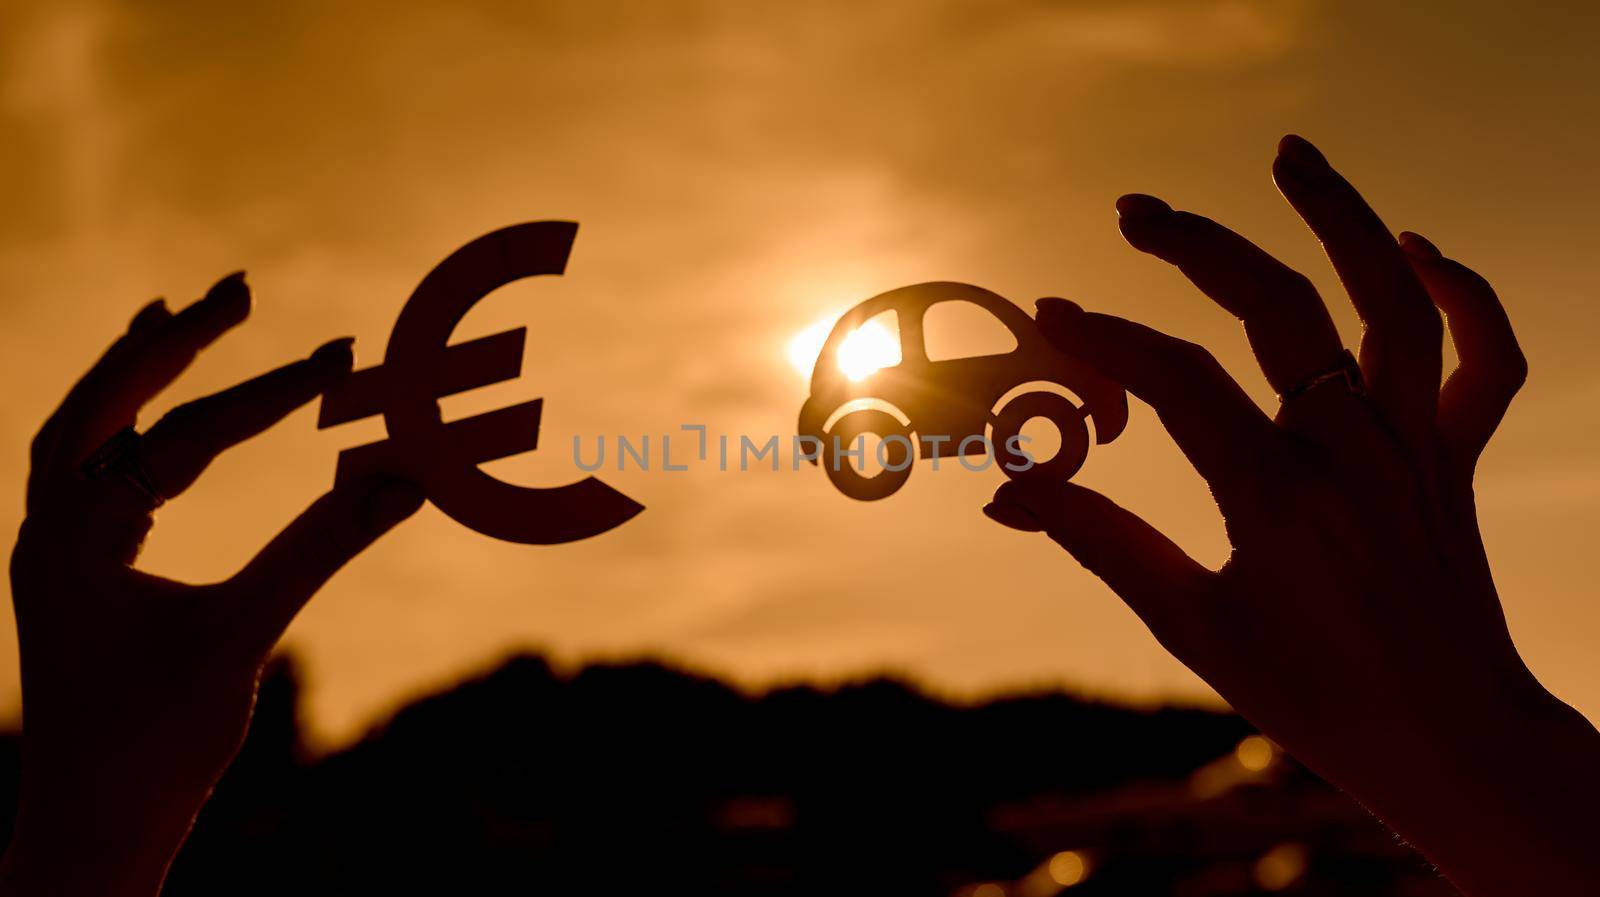 Euro symbol and car in women's hands contoured at sunset. High quality photo